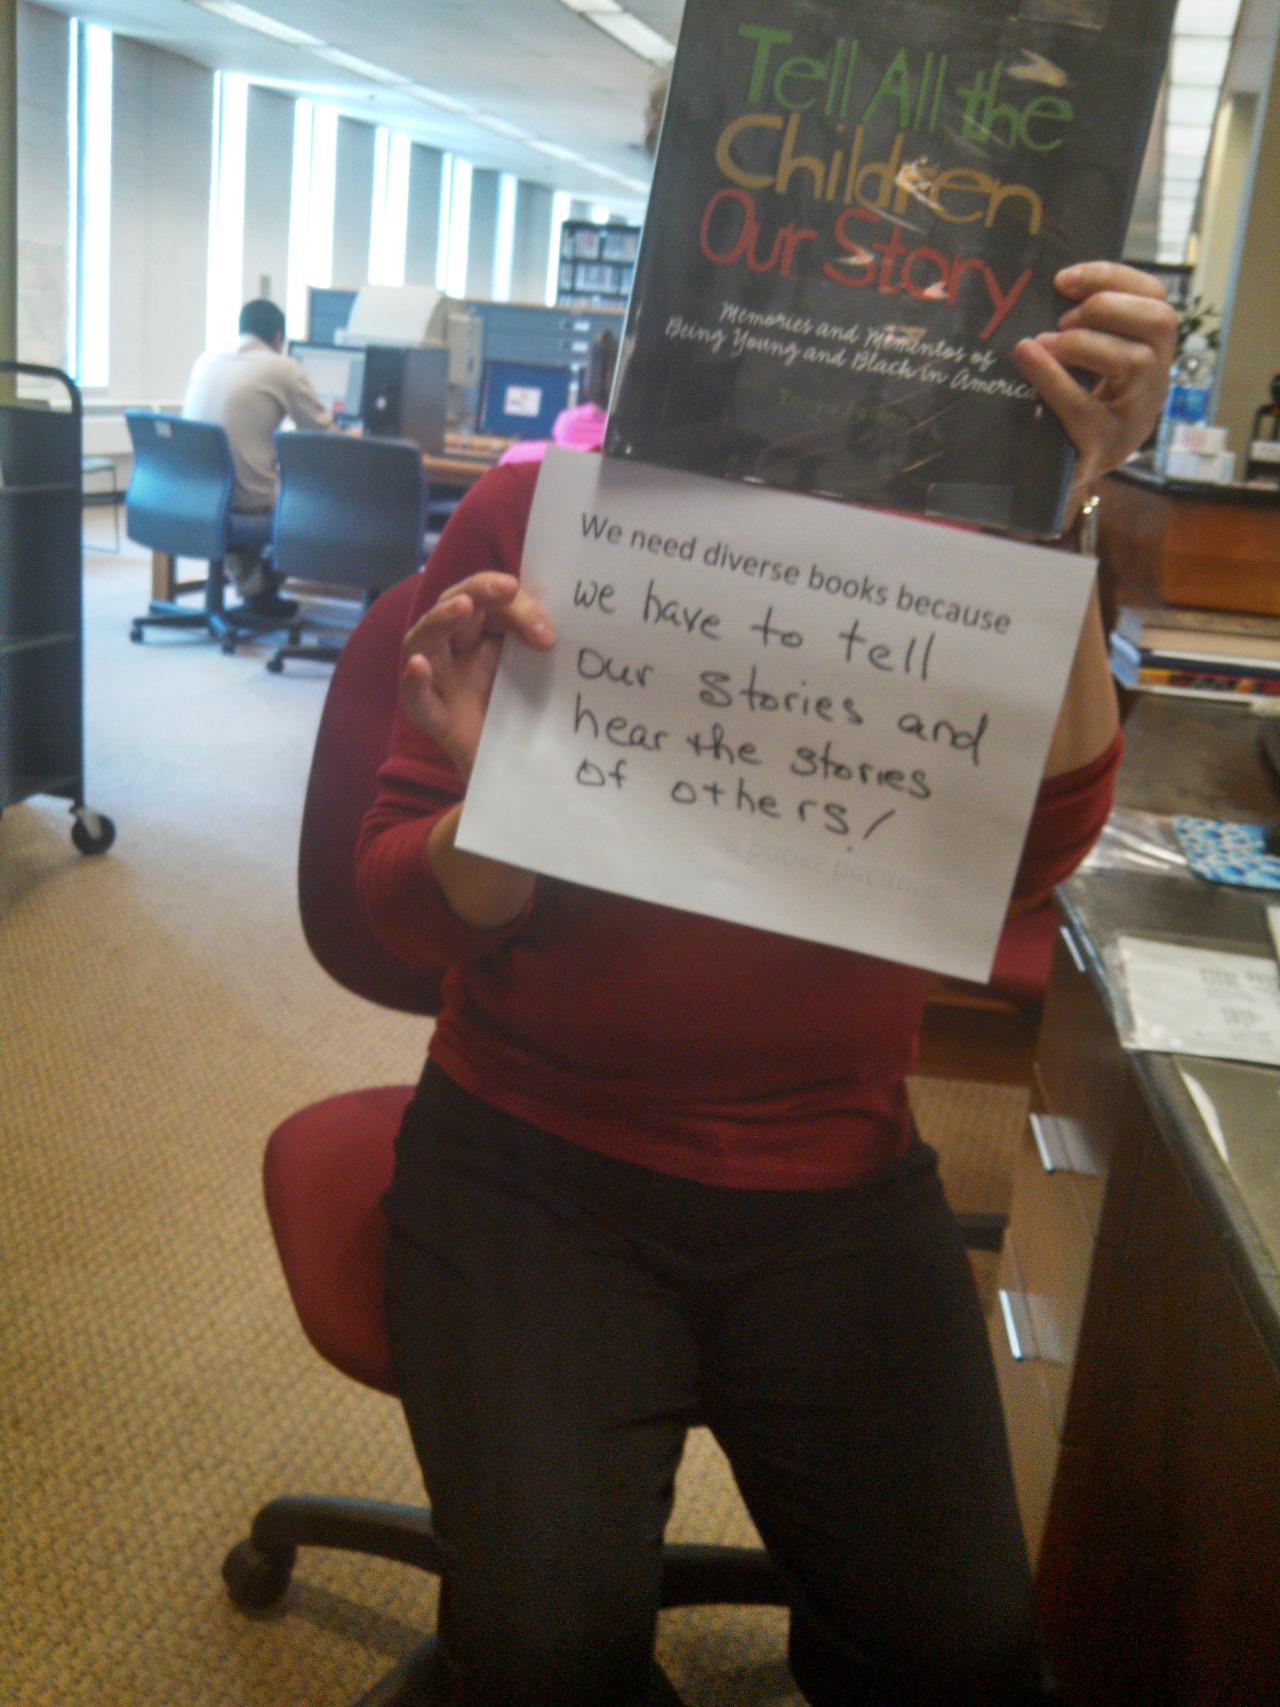 #WeNeedDiverseBooks because we have to tell our stories and hear the stories of others!